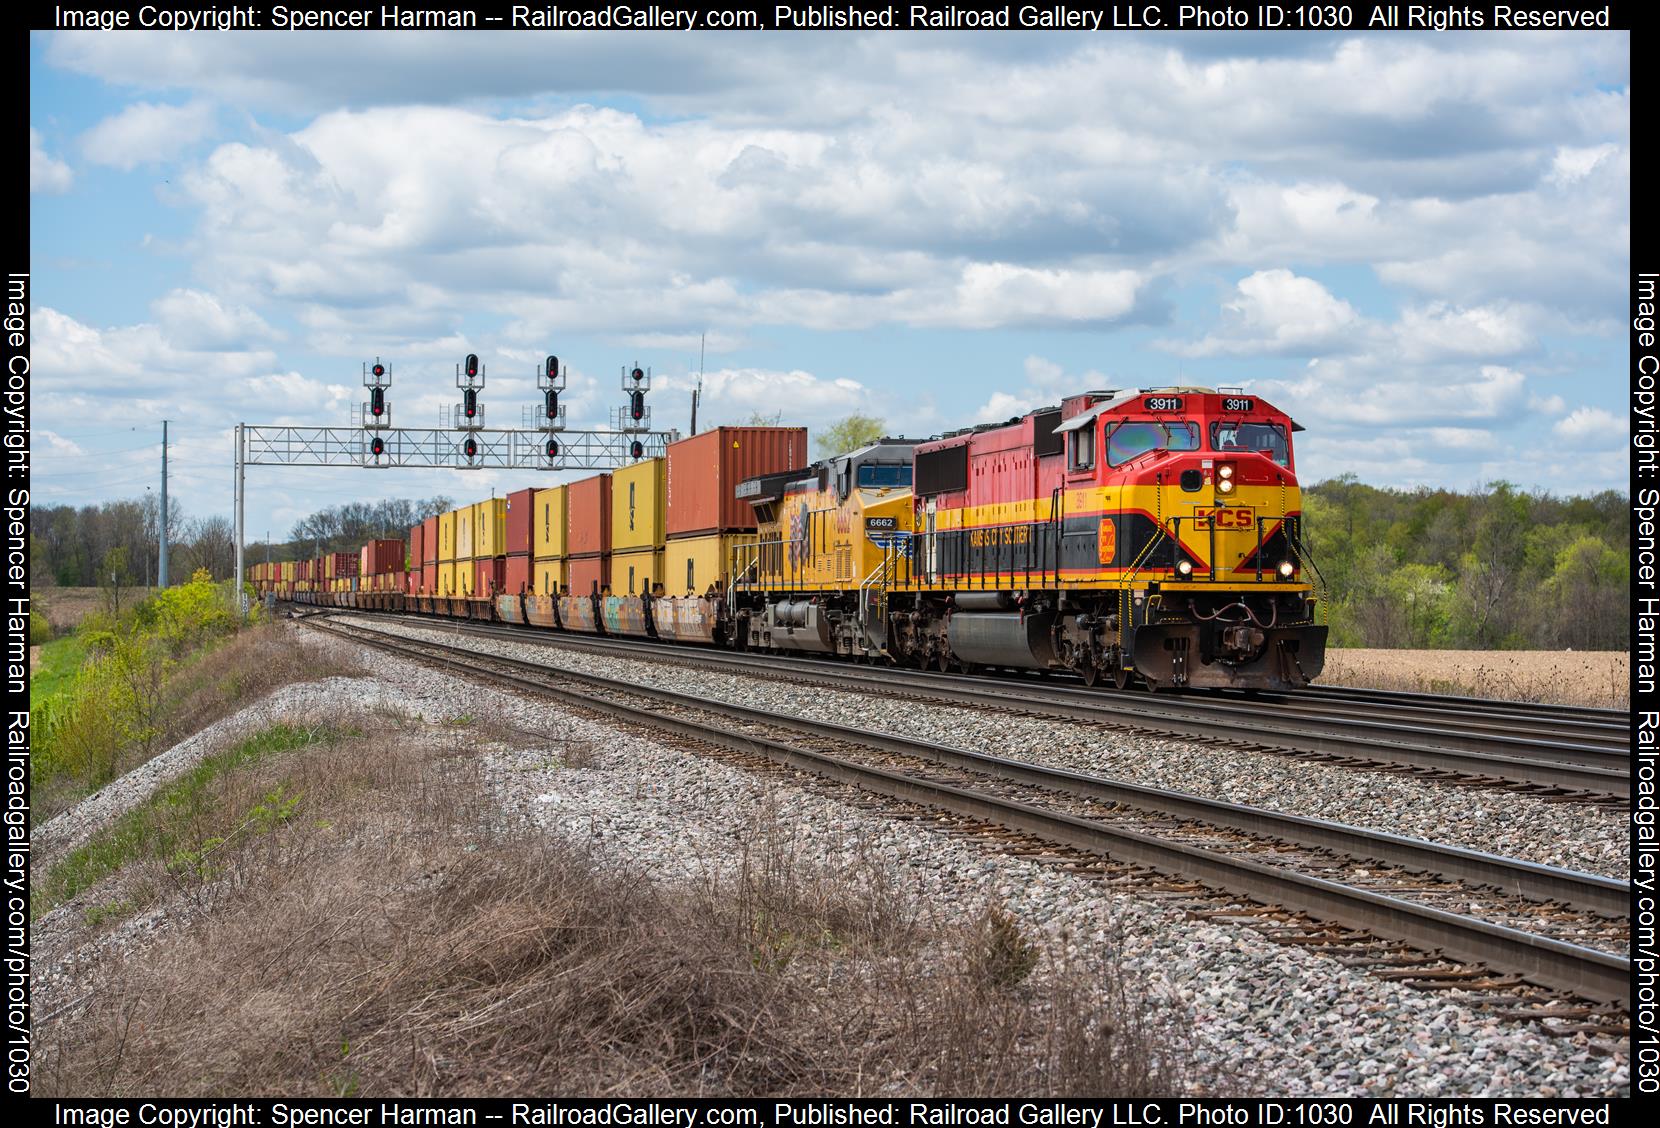 KCS 3911 is a class EMD SD70MAC and  is pictured in Altona, Indiana, USA.  This was taken along the Garrett Subdivision on the CSX Transportation. Photo Copyright: Spencer Harman uploaded to Railroad Gallery on 05/04/2023. This photograph of KCS 3911 was taken on Thursday, May 04, 2023. All Rights Reserved. 